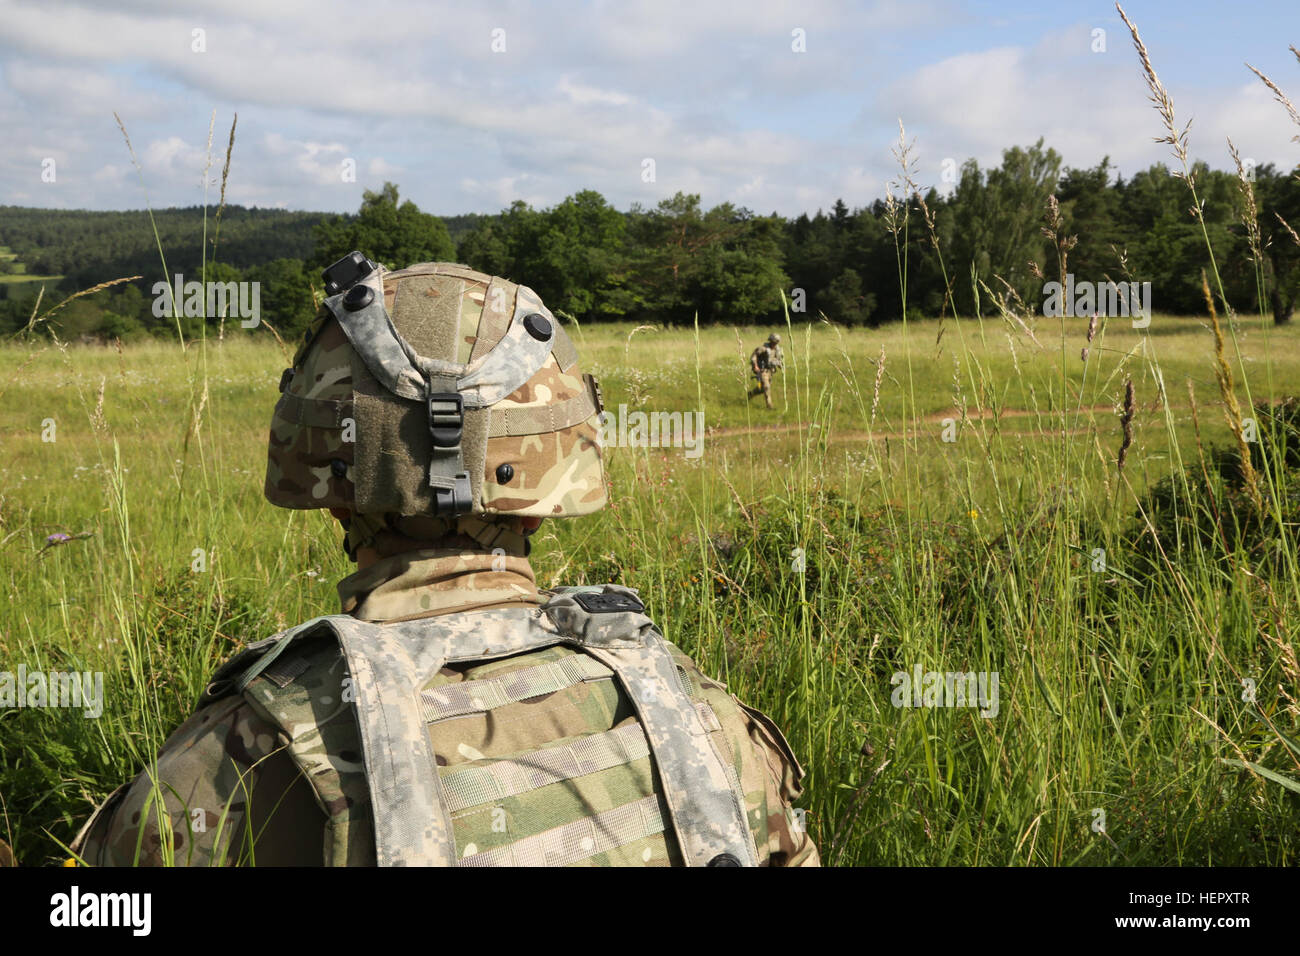 A British soldier of Airborne Combined Joint Expeditionary Force provides security while conducting tactical operations during Swift Response 16 training exercise at the Hohenfels Training Area, a part of the Joint Multinational Readiness Center, in Hohenfels, Germany, Jun. 22, 2016. Exercise Swift Response is one of the premier military crisis response training events for multi-national airborne forces in the world. The exercise is designed to enhance the readiness of the combat core of the U.S. Global Response Force – currently the 82nd Airborne Division’s 1st Brigade Combat Team – to conduc Stock Photo